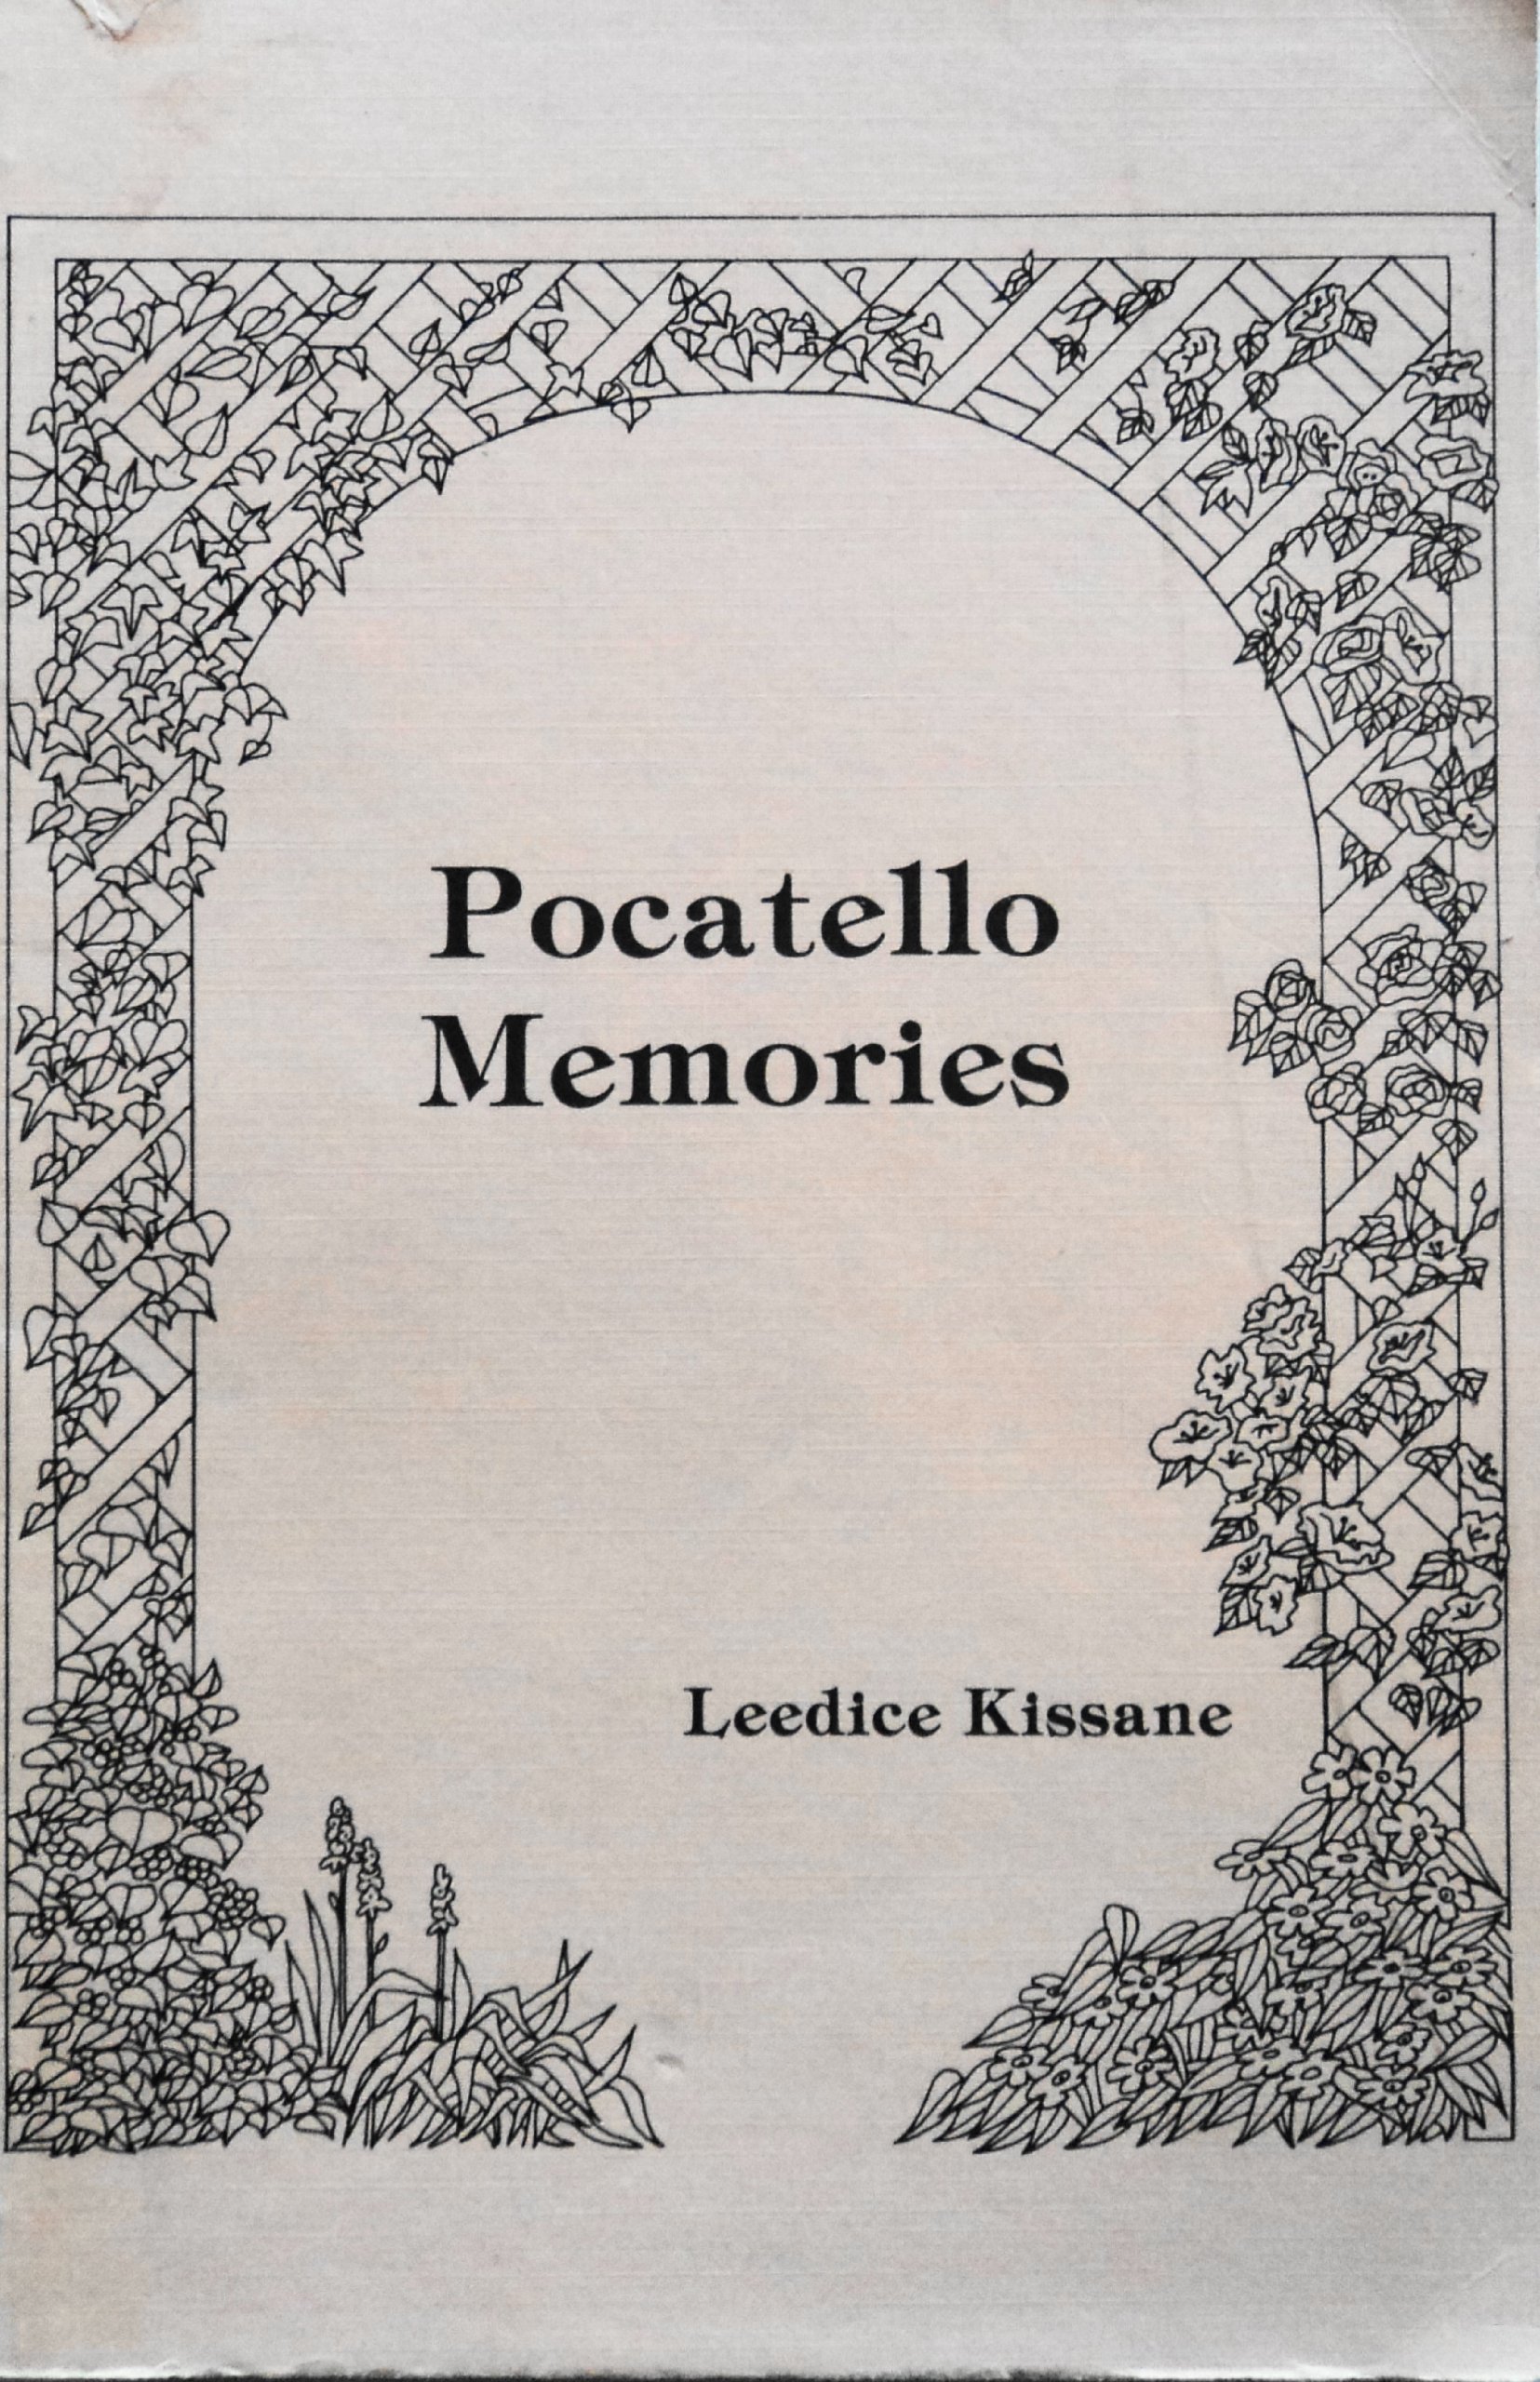 Pocatello memories: A collection of columns from the Idaho State Journal (book cover)